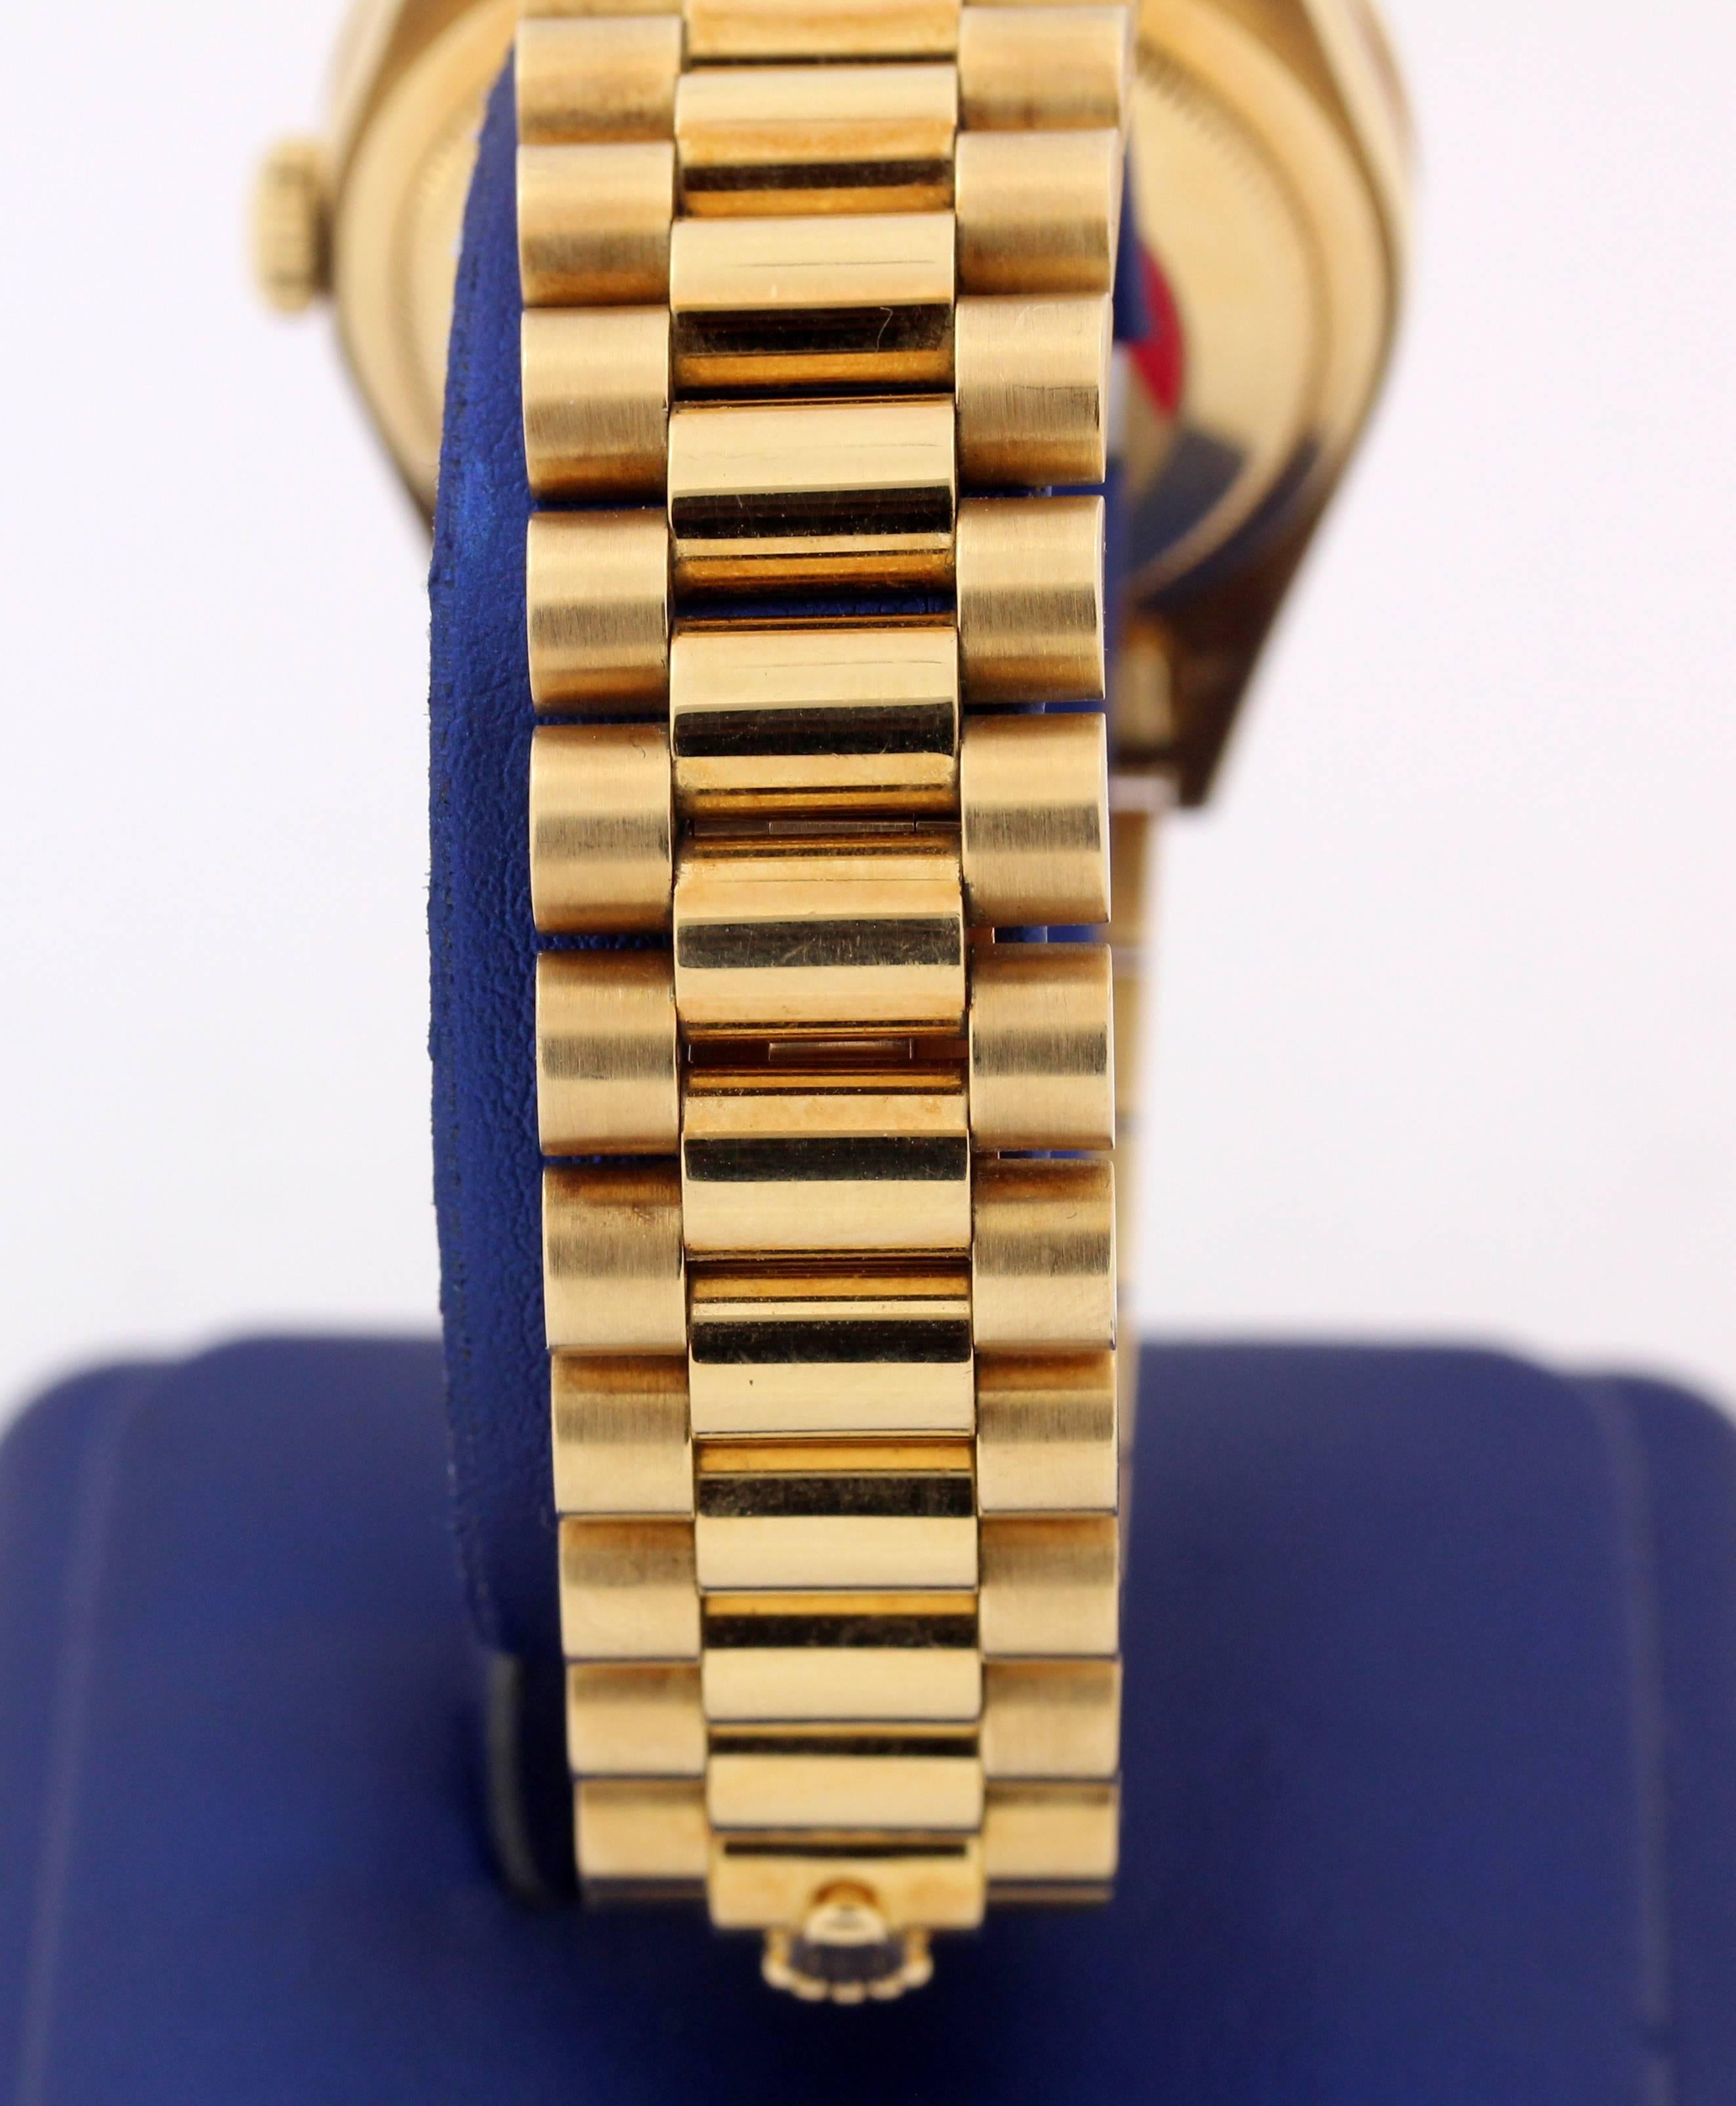 Yellow Gold Double Quick Rolex Day Date with Custom Bezel Features:

Very Good Condition

Model Name: Day Date President 36mm

Aftermarket Customer Diamond bezel with 40 diamonds

No box or papers

Entirely done in 18K Yellow Gold 

Retail: